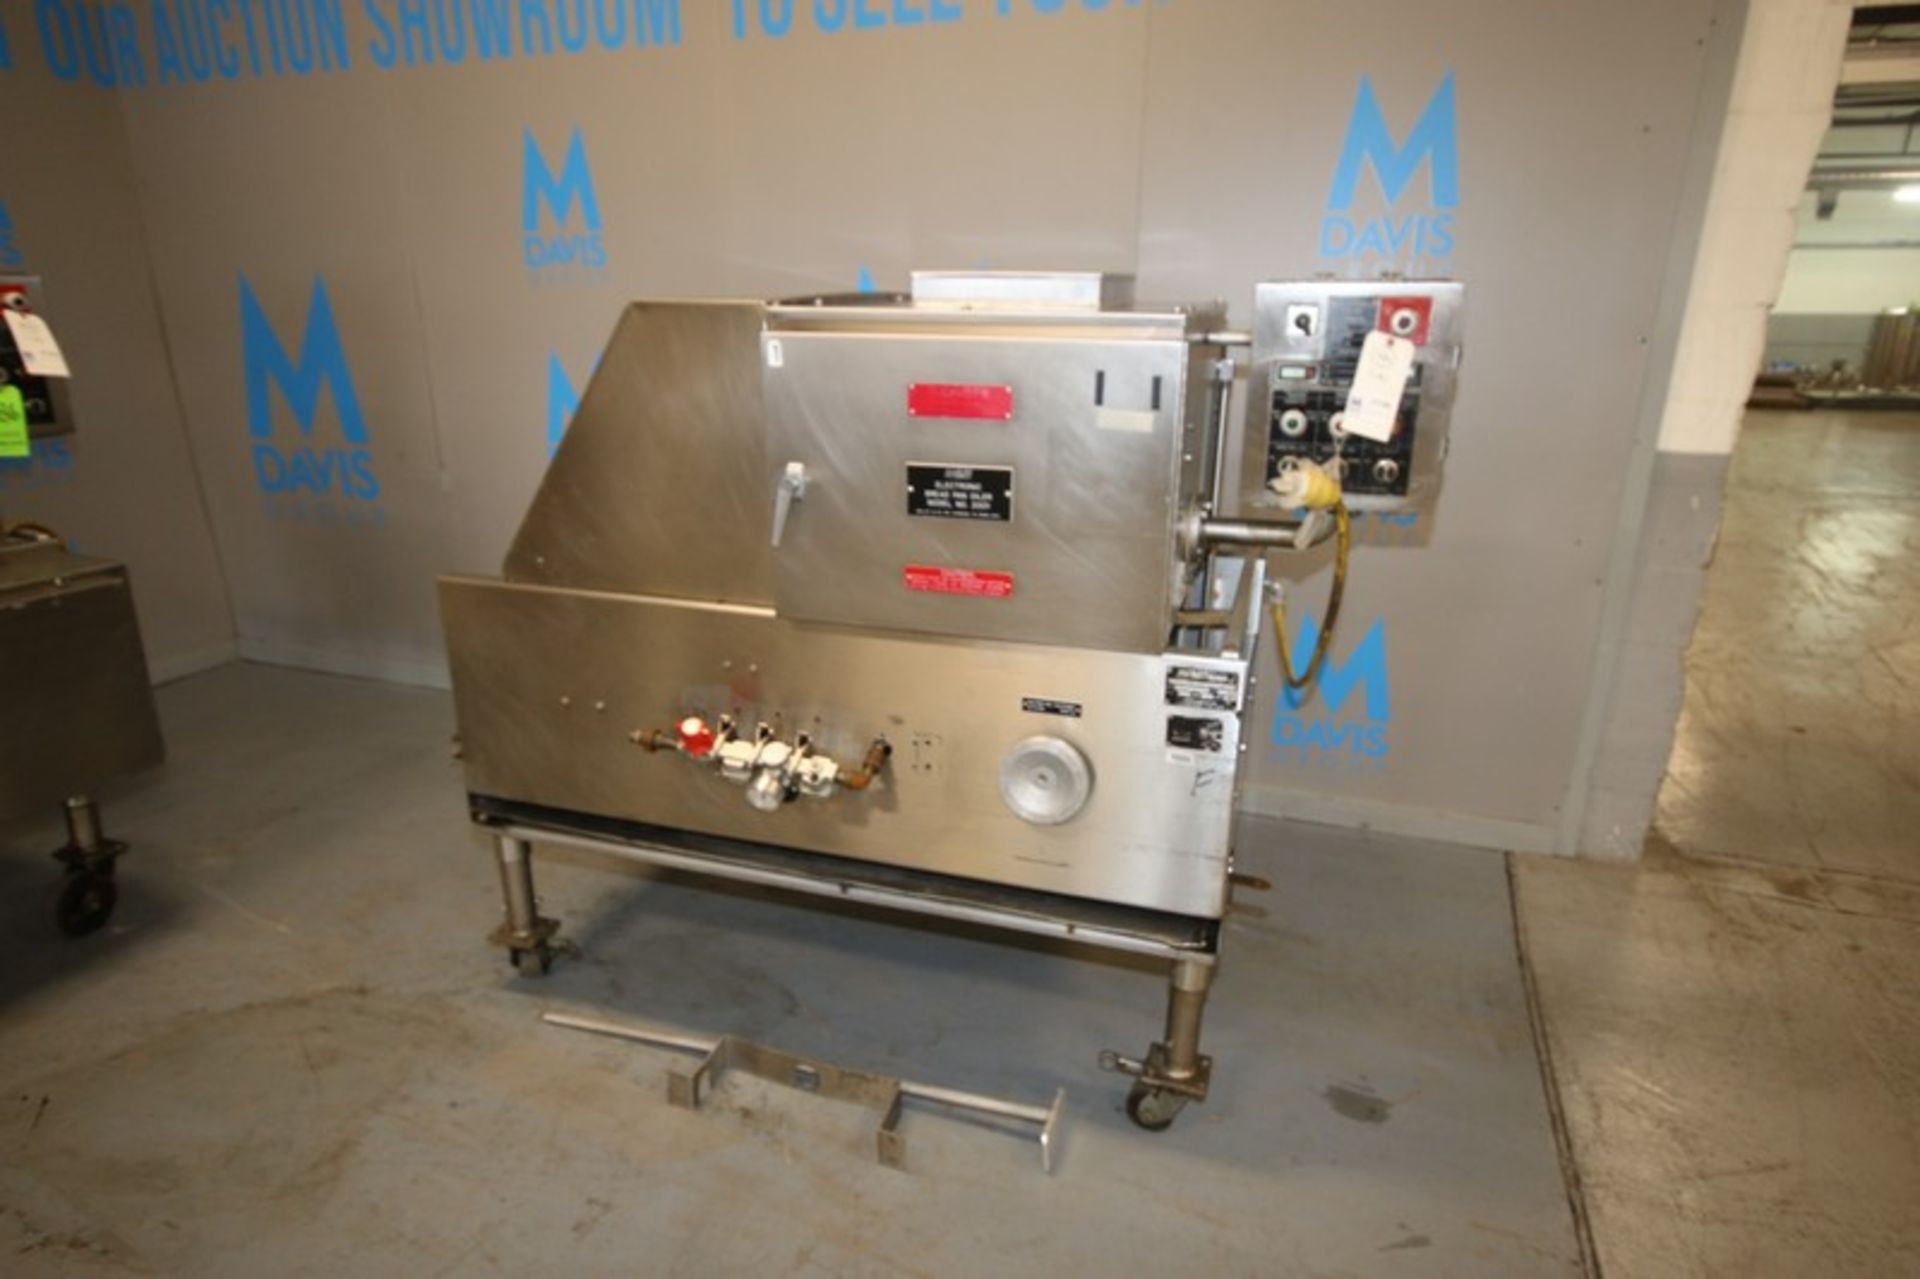 Mallet S/S Bread Pan Oiler,M/N 2001A 90085, S/N 240-456, 460 Volts, 3 Phase (INV#77740)(Located @